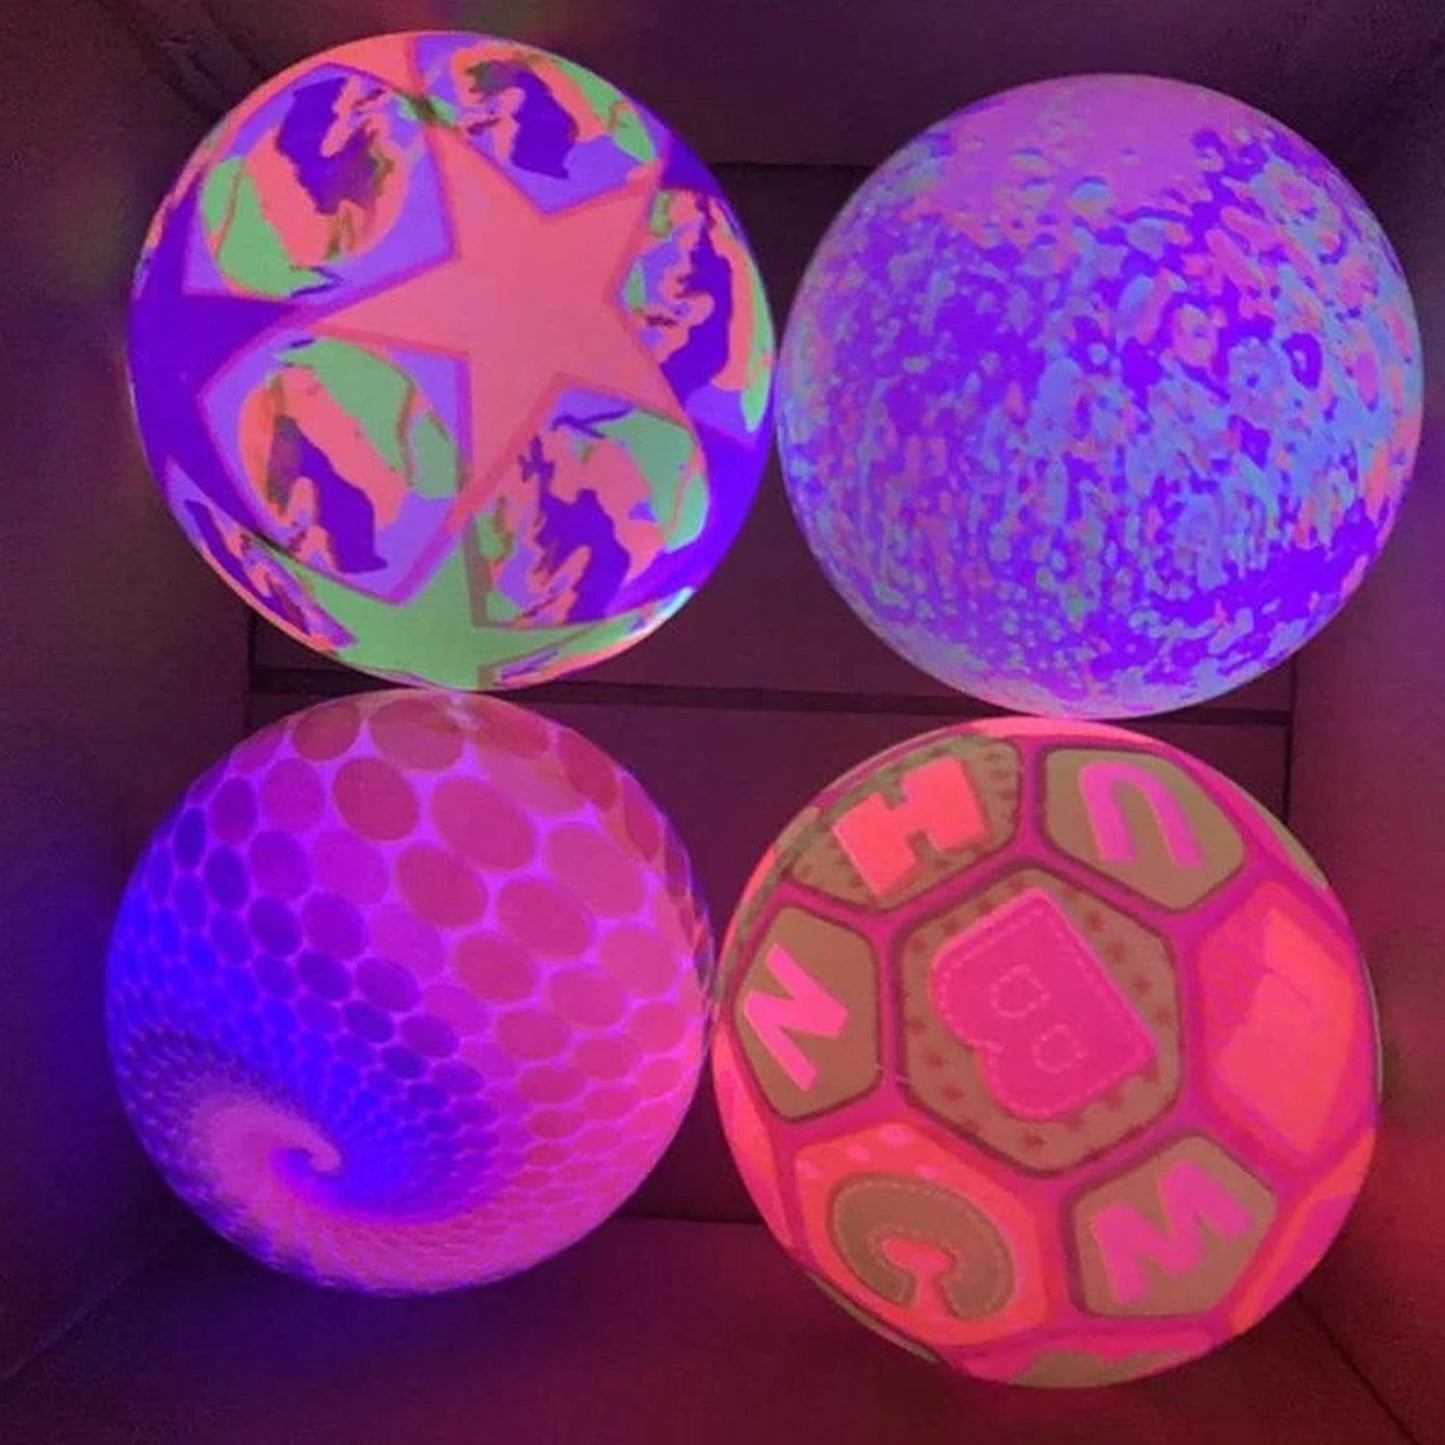 8056 Bouncy Stress Reliever Fun Play Led Rubber Balls for Kids (1Pc Only) DeoDap